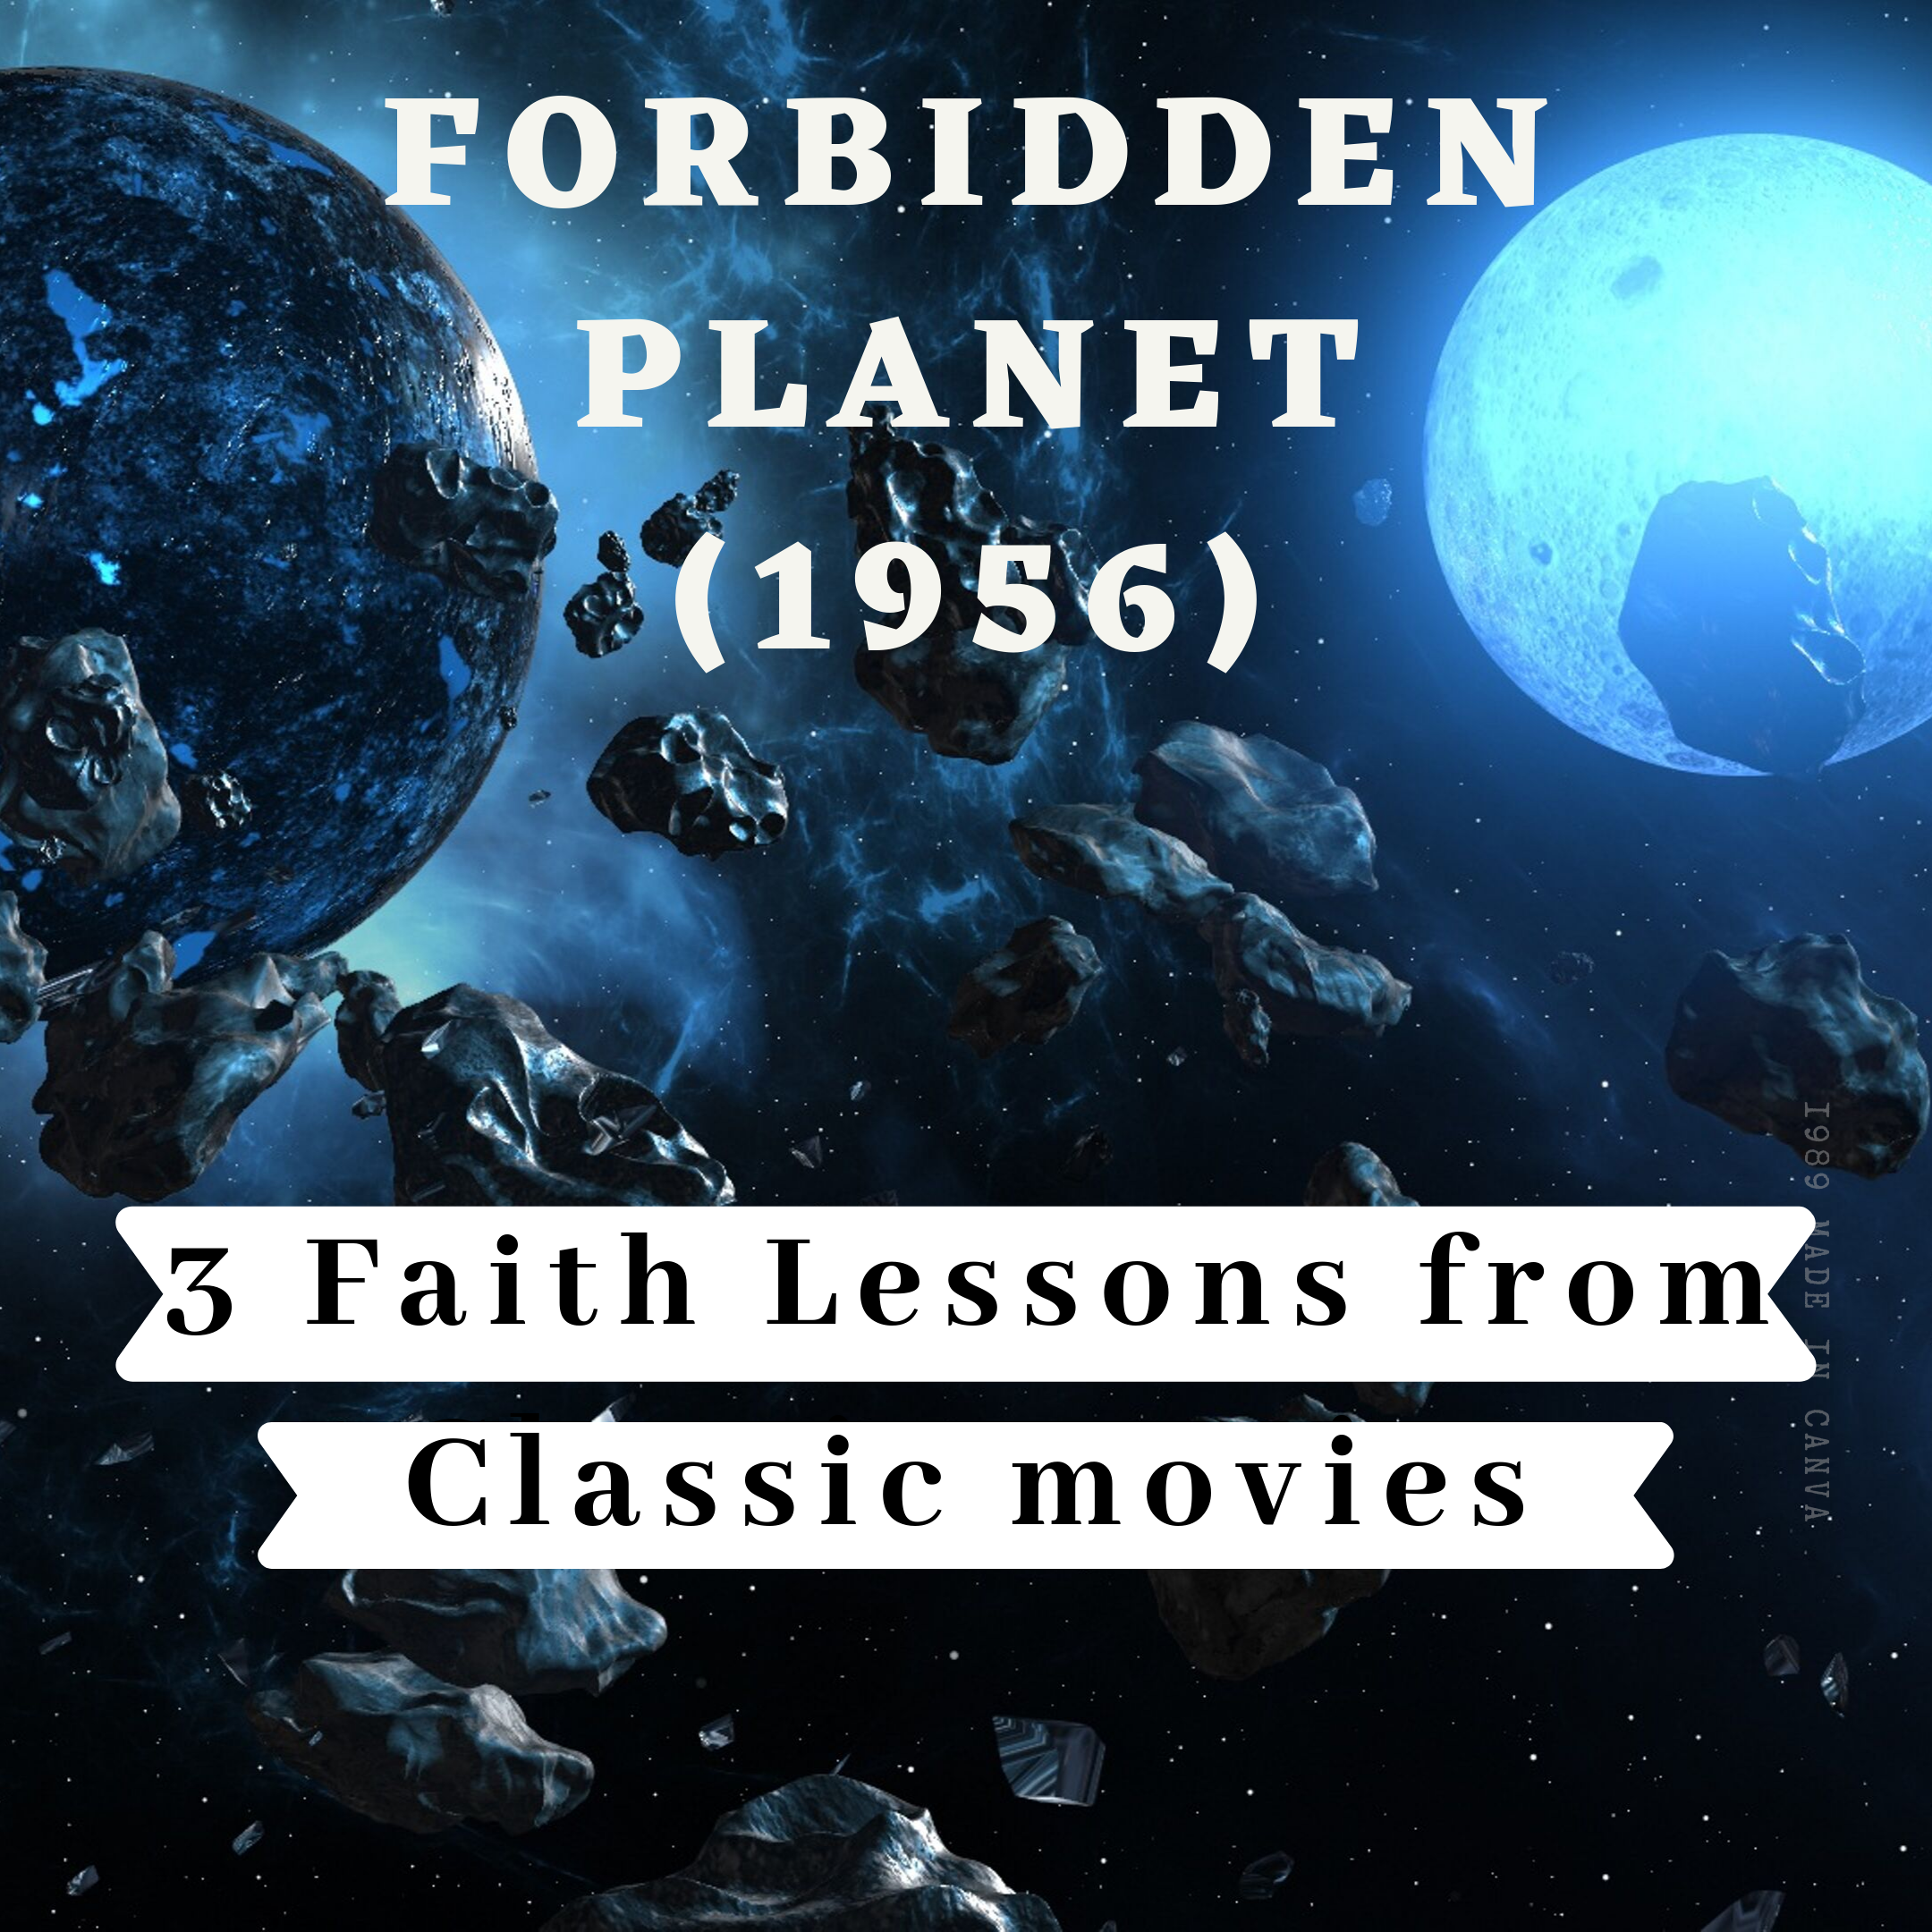 3 lessons from Forbidden Planet